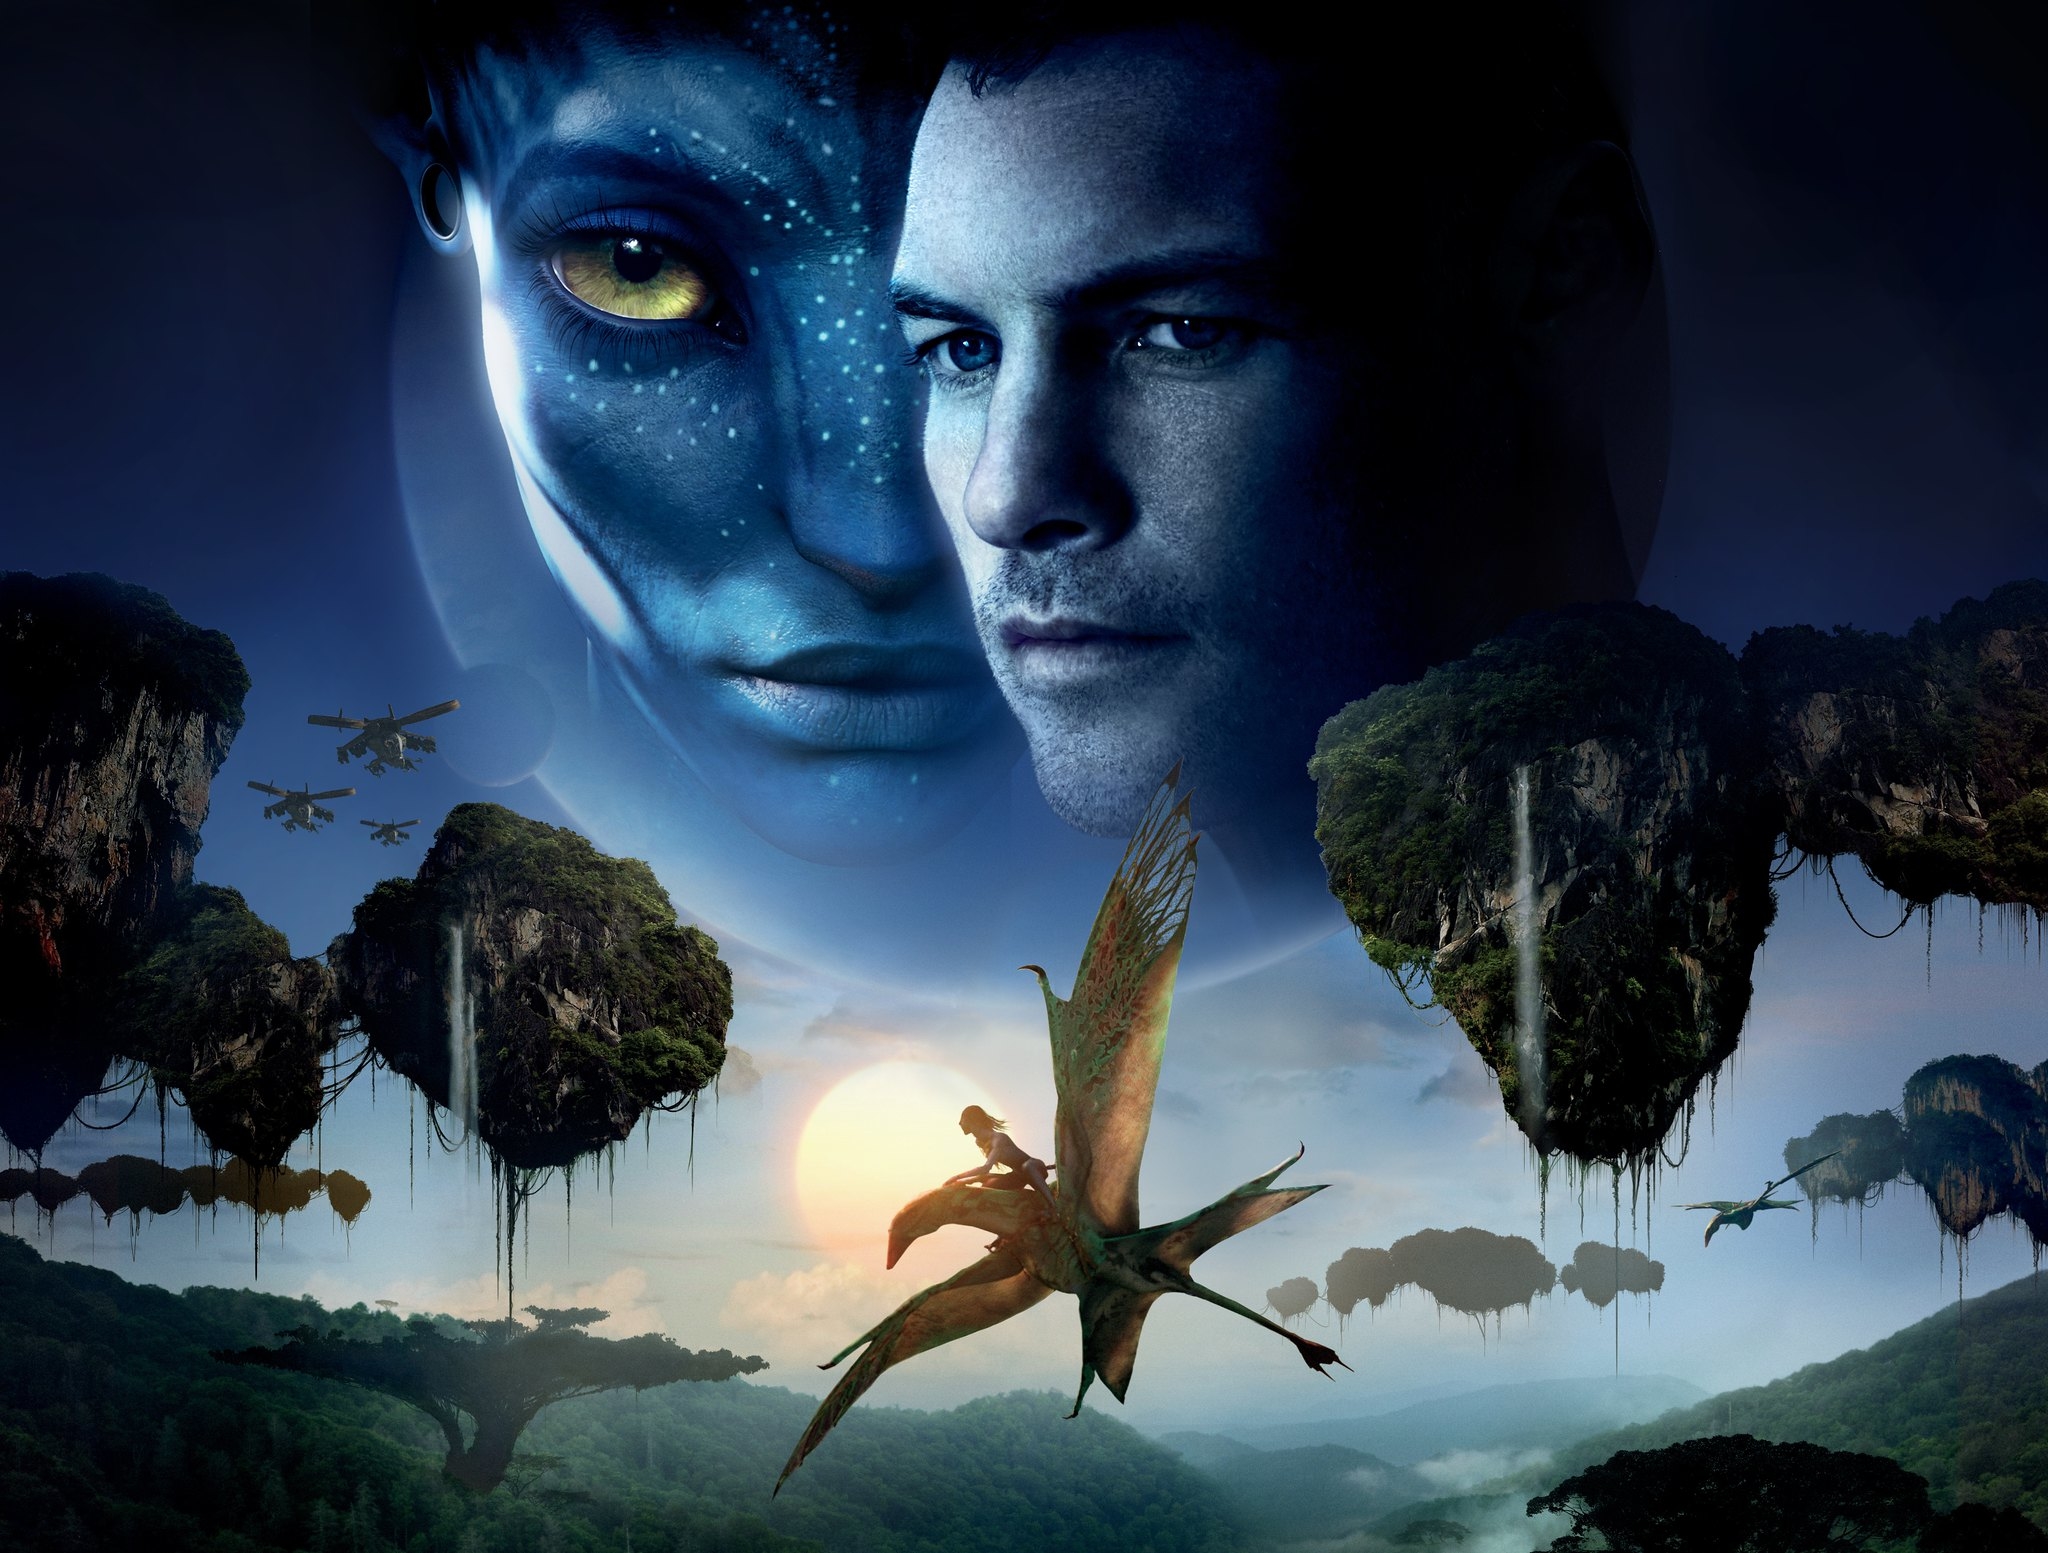 Original Avatar Movie Poster Wallpaper, HD Movies 4K Wallpapers, Images